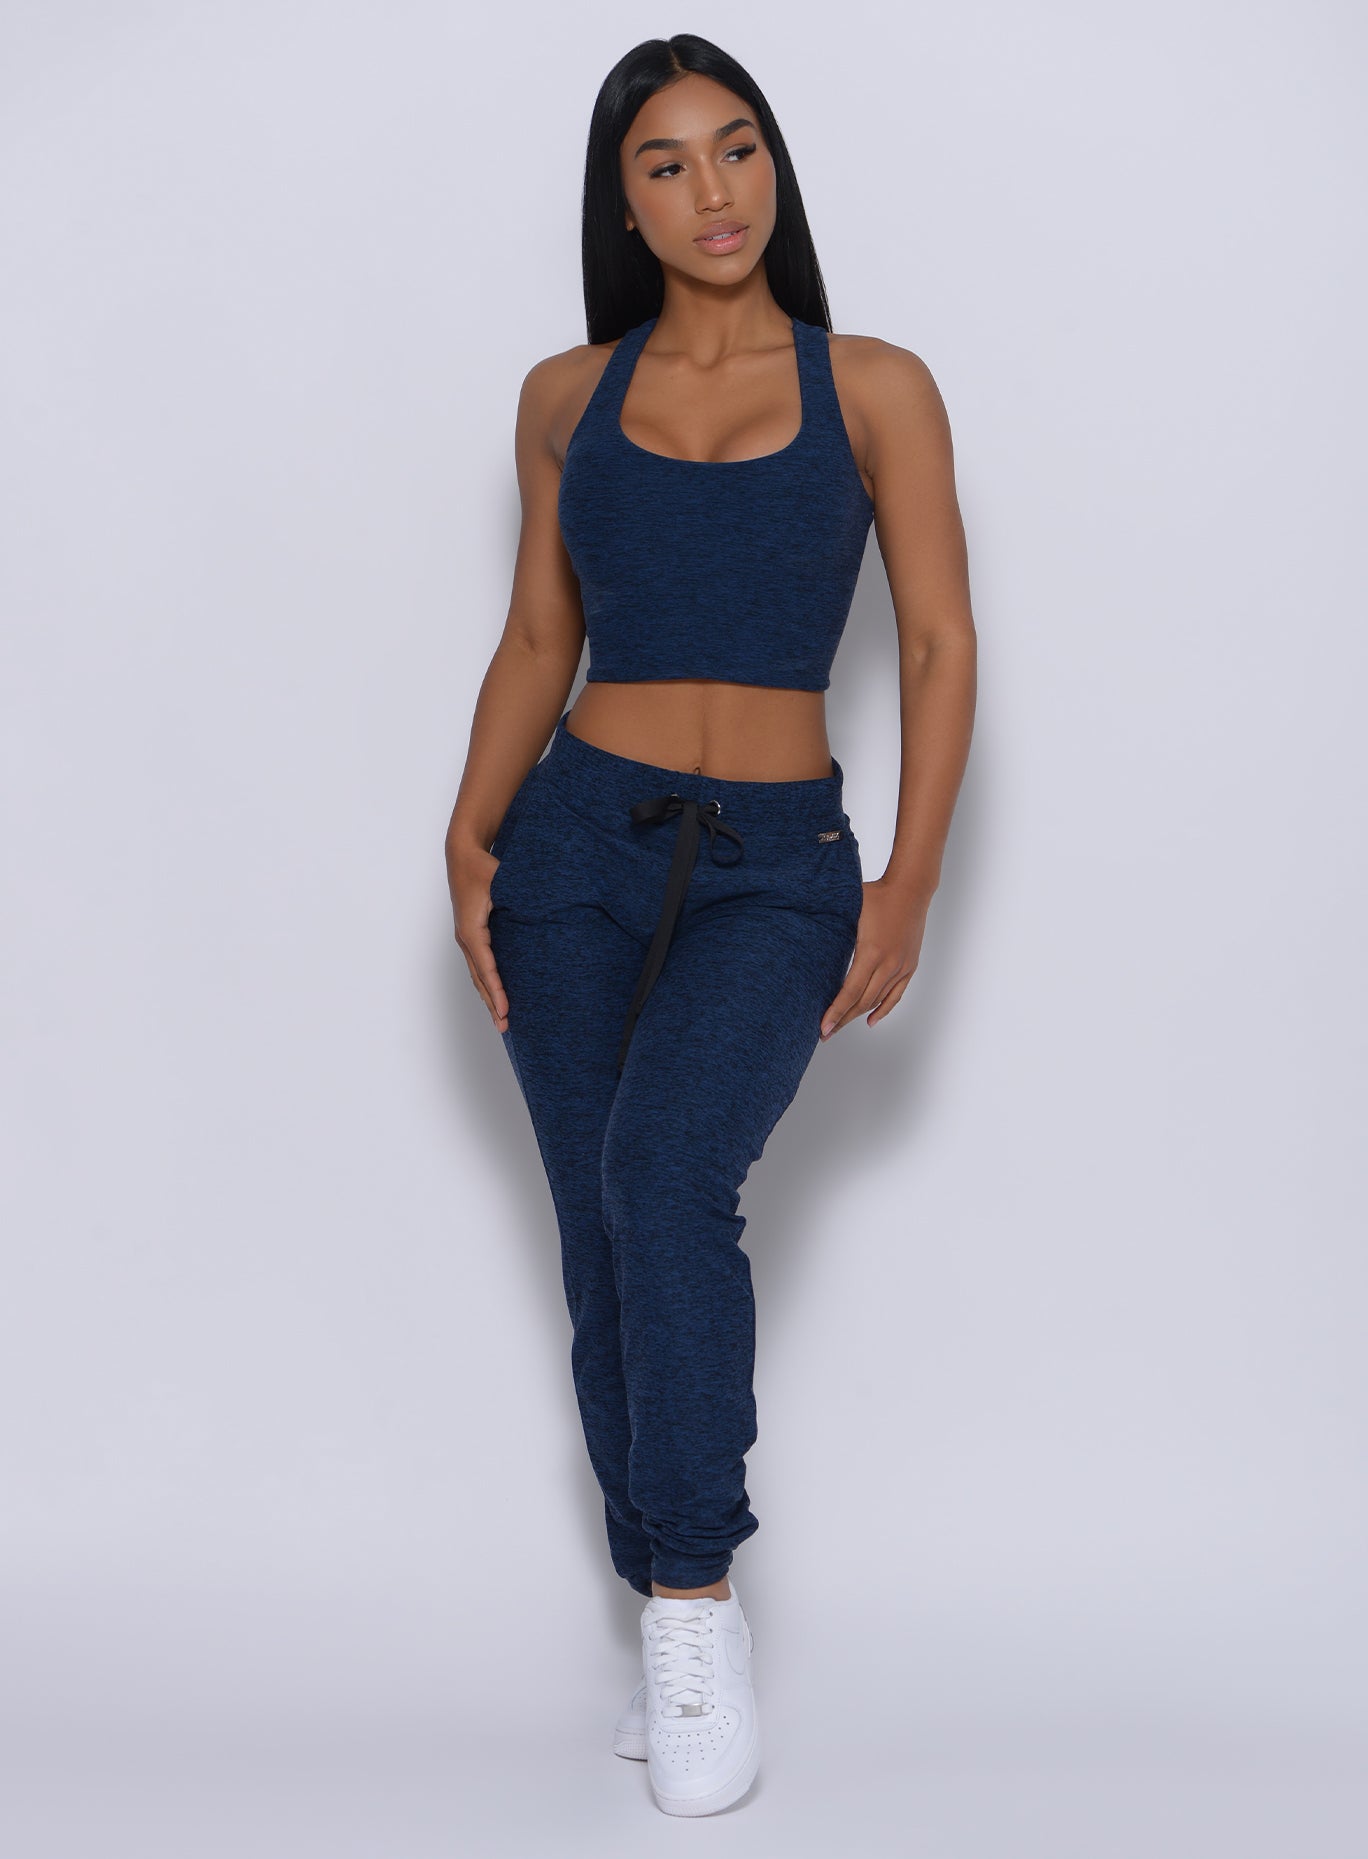 Front profile view of a model wearing our signature joggers in sapphire blue color and a matching bra